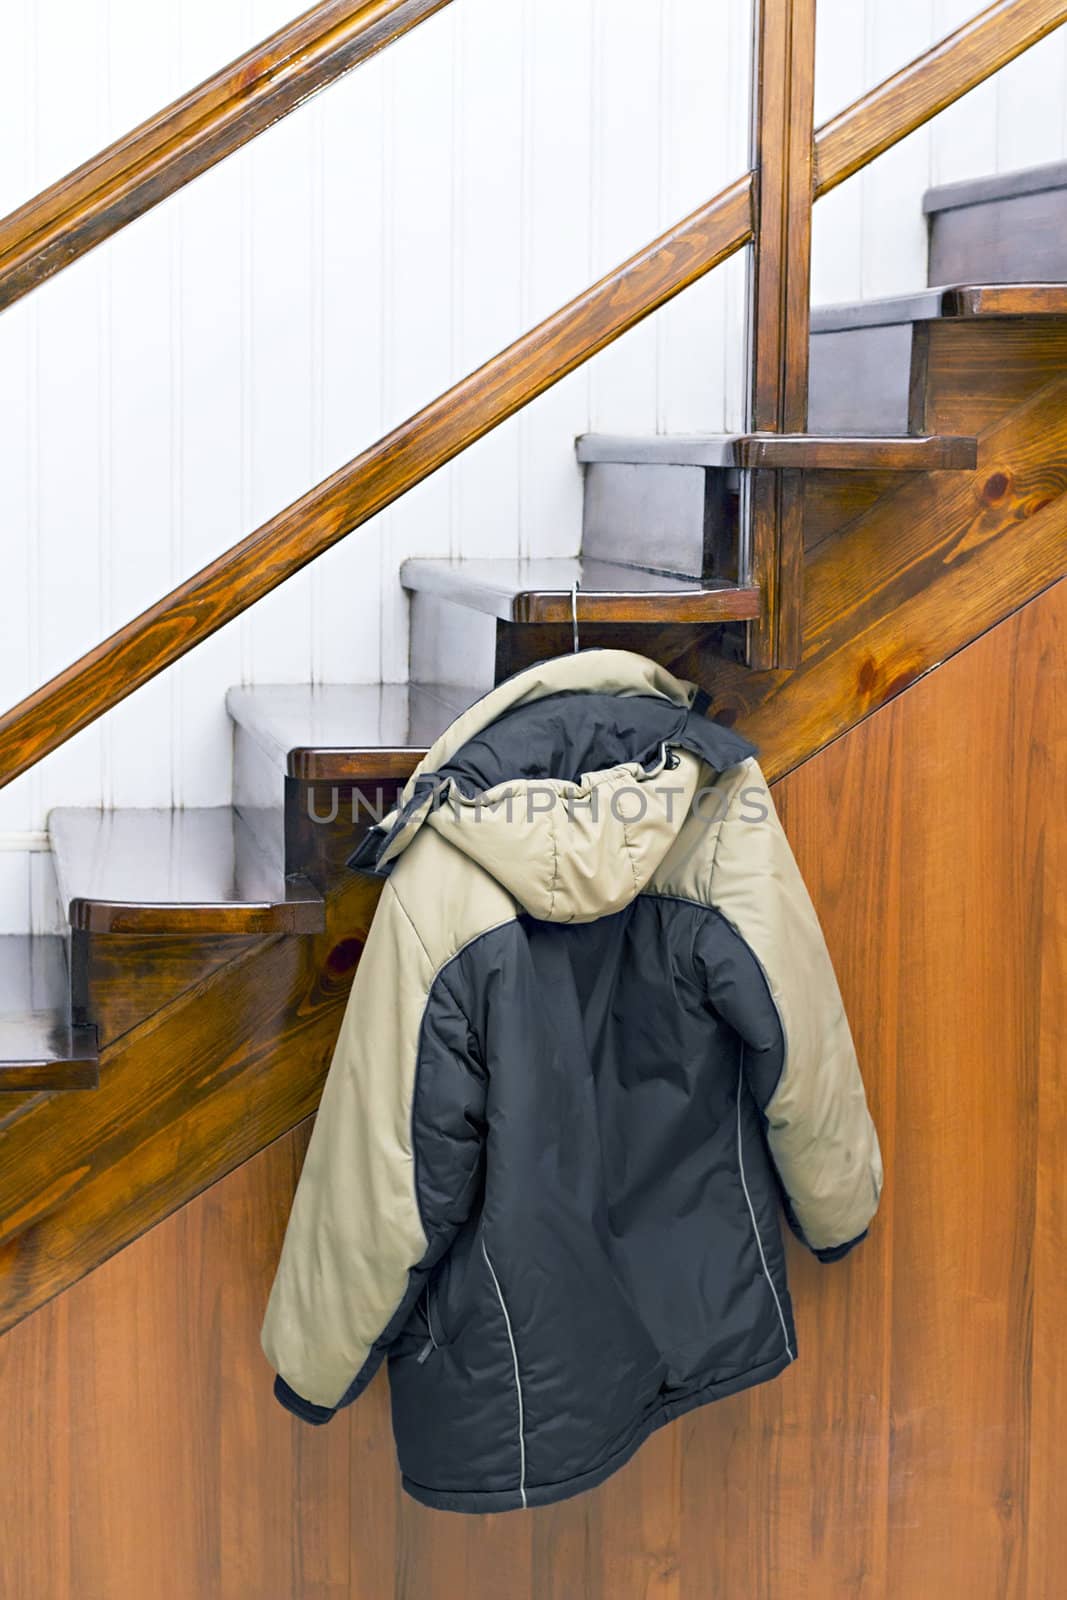 jacket on a hanger hanging on the stairs